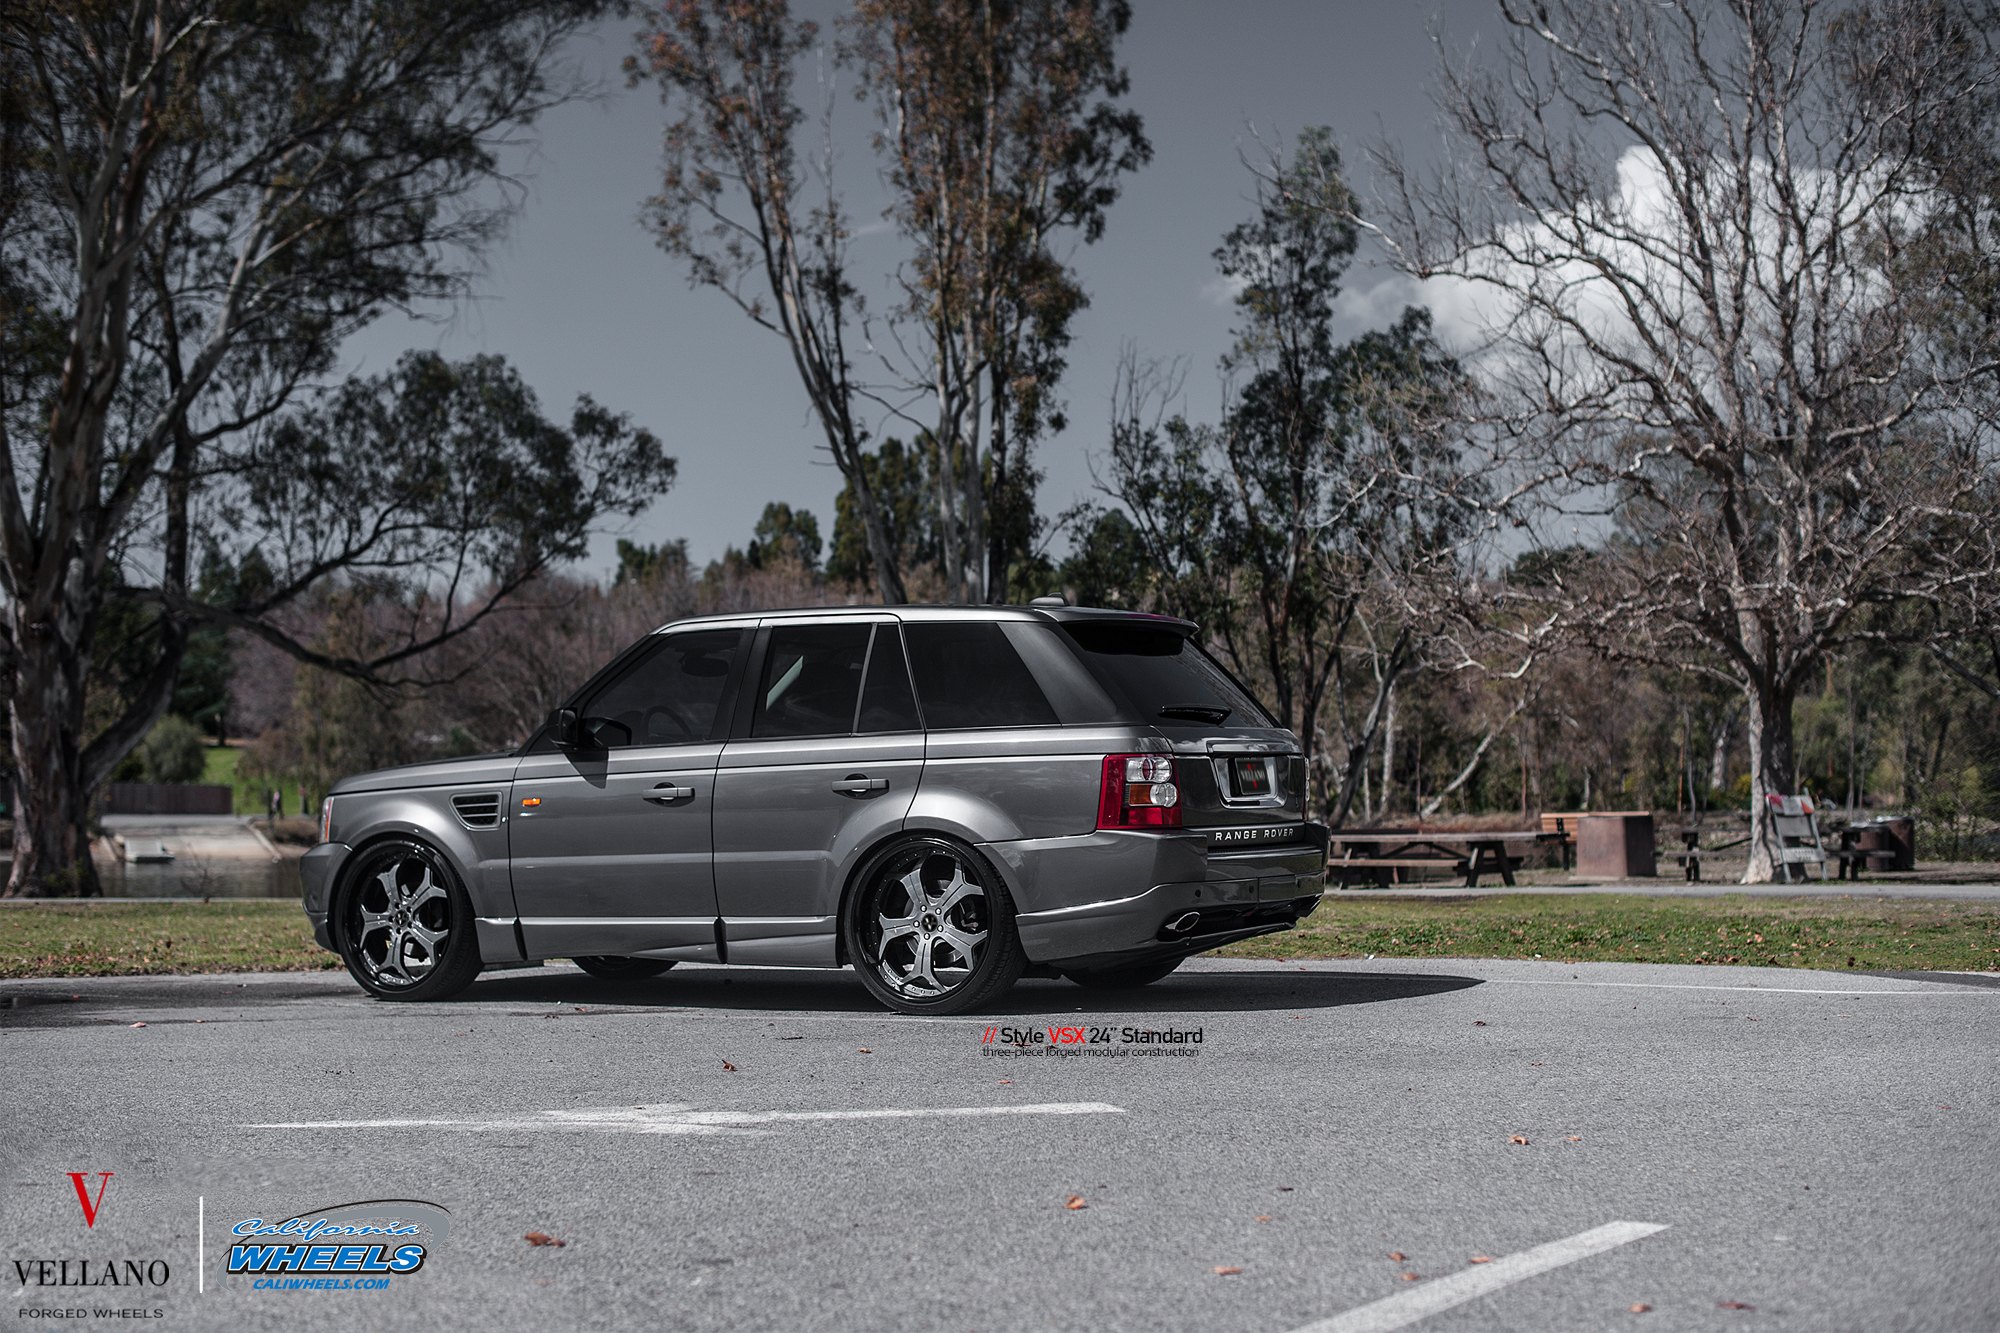 Gray Range Rover Sport with Roofline Spoiler - Photo by Vellano